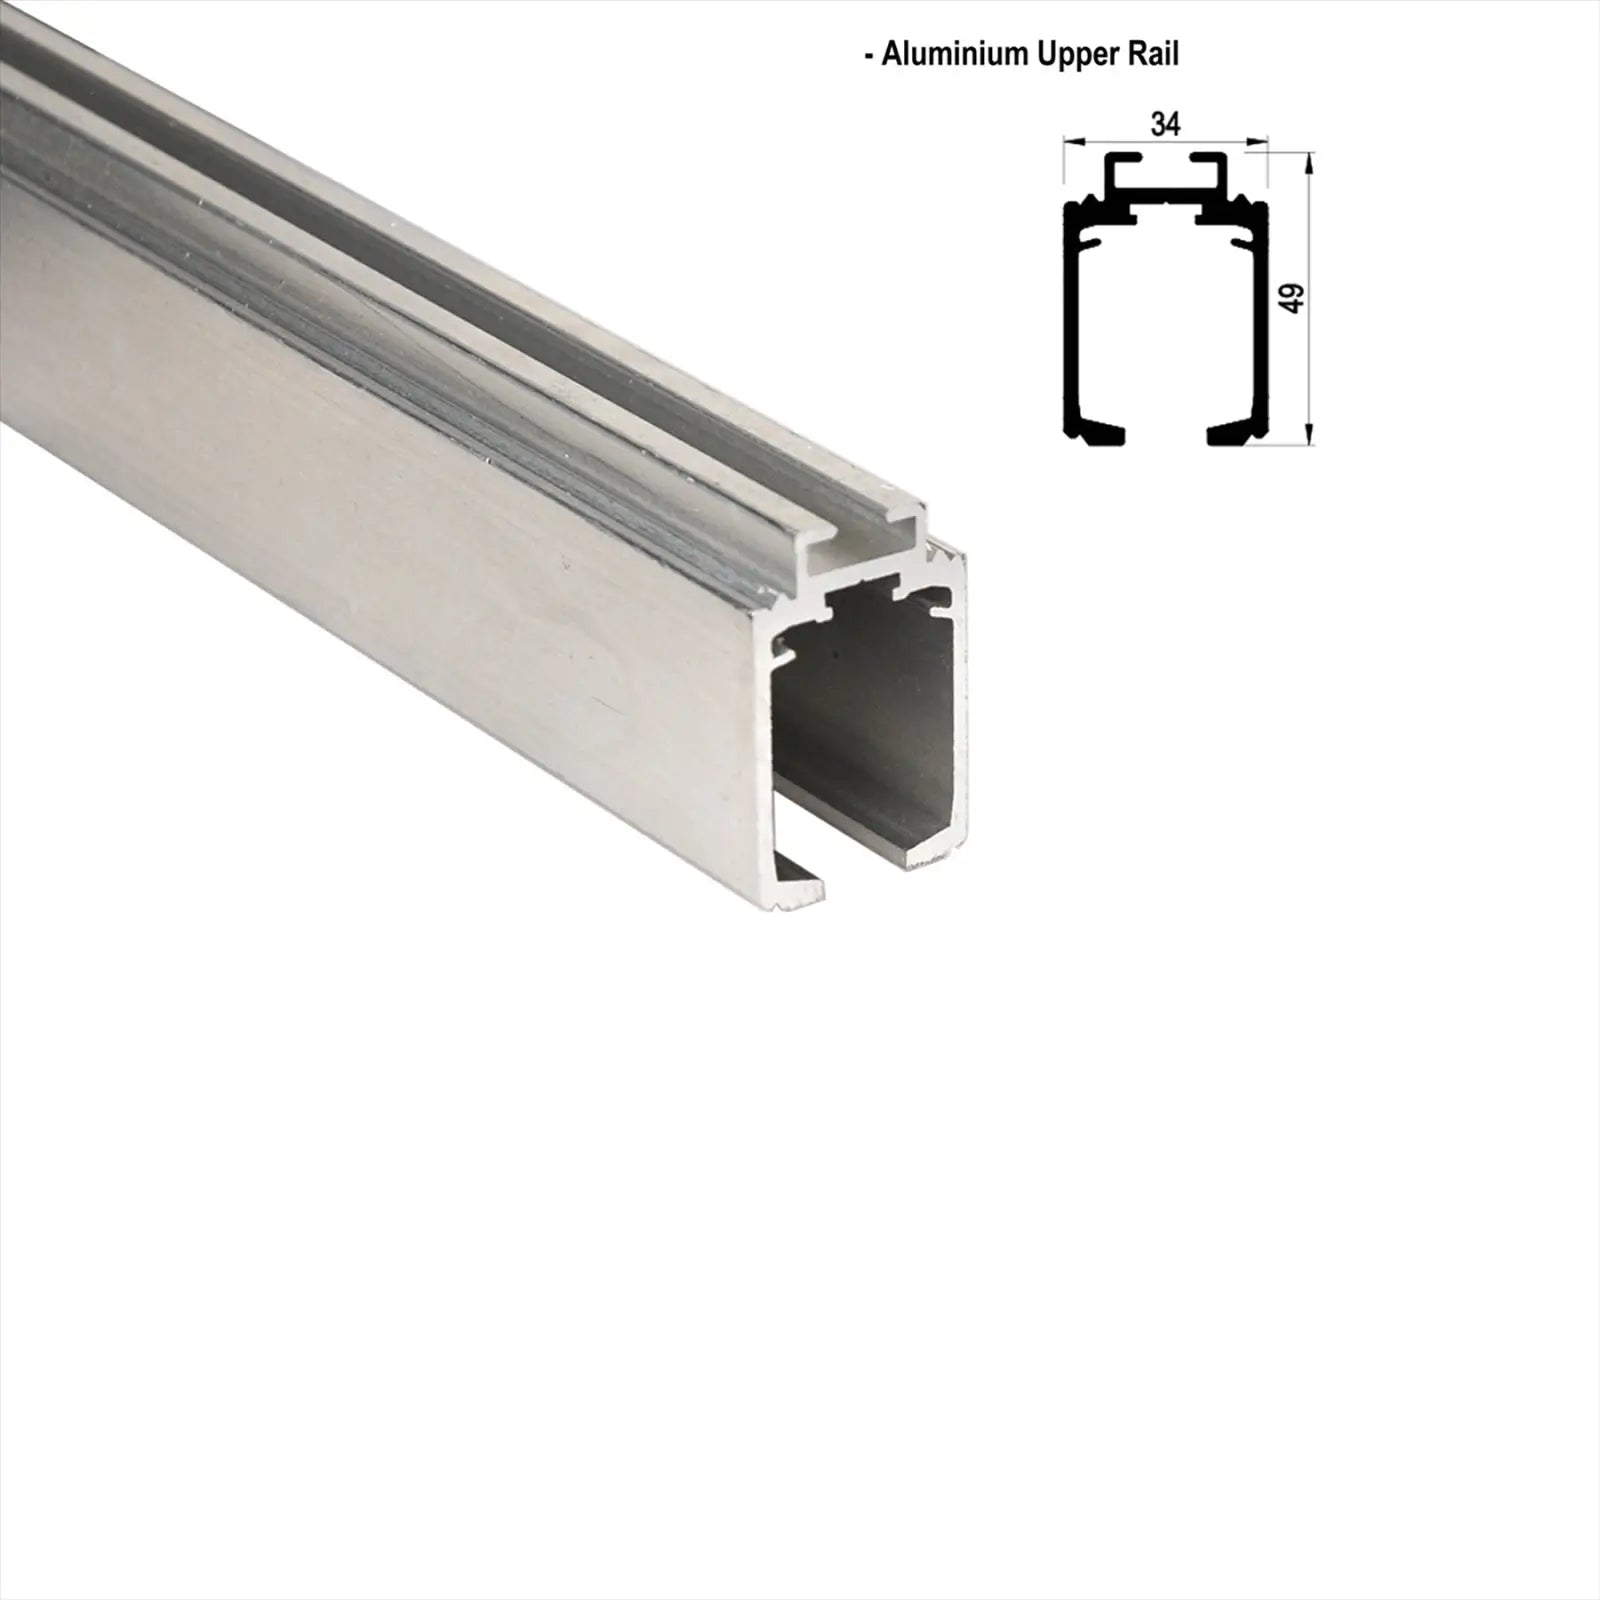 DS-Slide Double Synchro Sliding Door Kit - 3000mm Track - One Way Soft Close - Decor And Decor